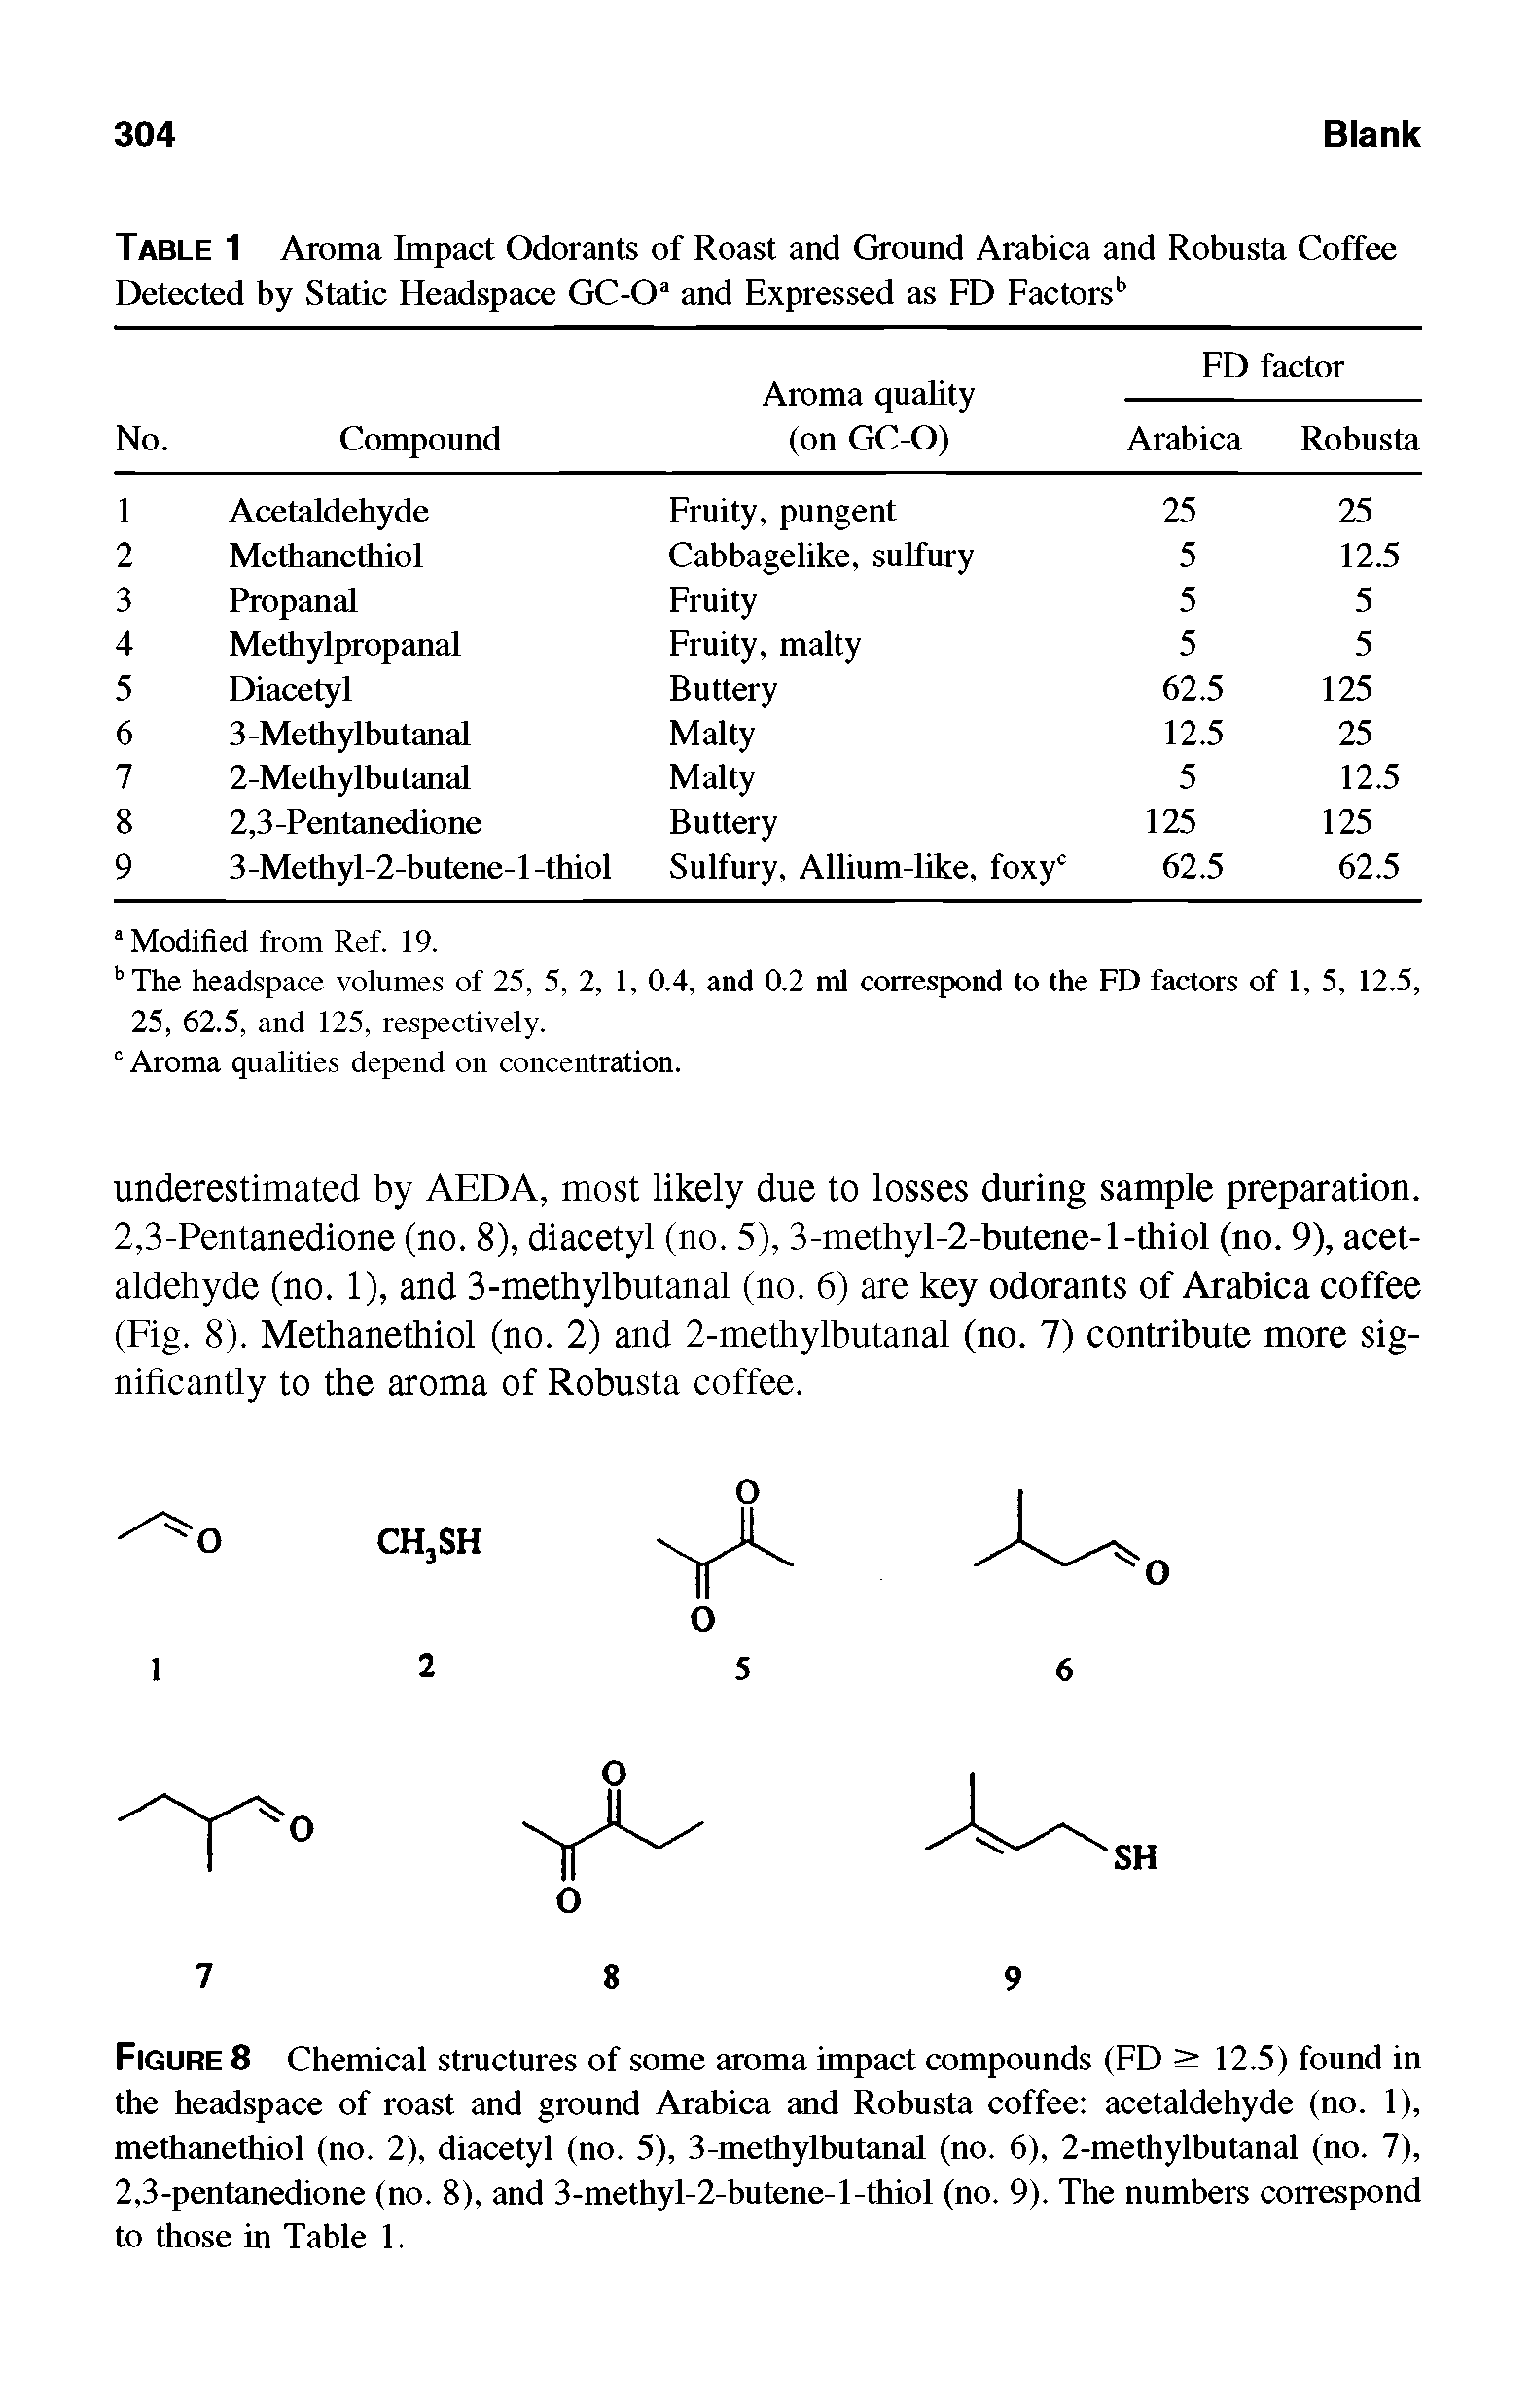 Figure 8 Chemical structures of some aroma impact compounds (FD > 12.5) found in the headspace of roast and ground Arabica and Robusta coffee acetaldehyde (no. 1), methanethiol (no. 2), diacetyl (no. 5), 3-methylbutanal (no. 6), 2-methylbutanal (no. 7), 2,3-pentanedione (no. 8), and 3-methyl-2-butene-l-thiol (no. 9). The numbers correspond to those in Table 1.